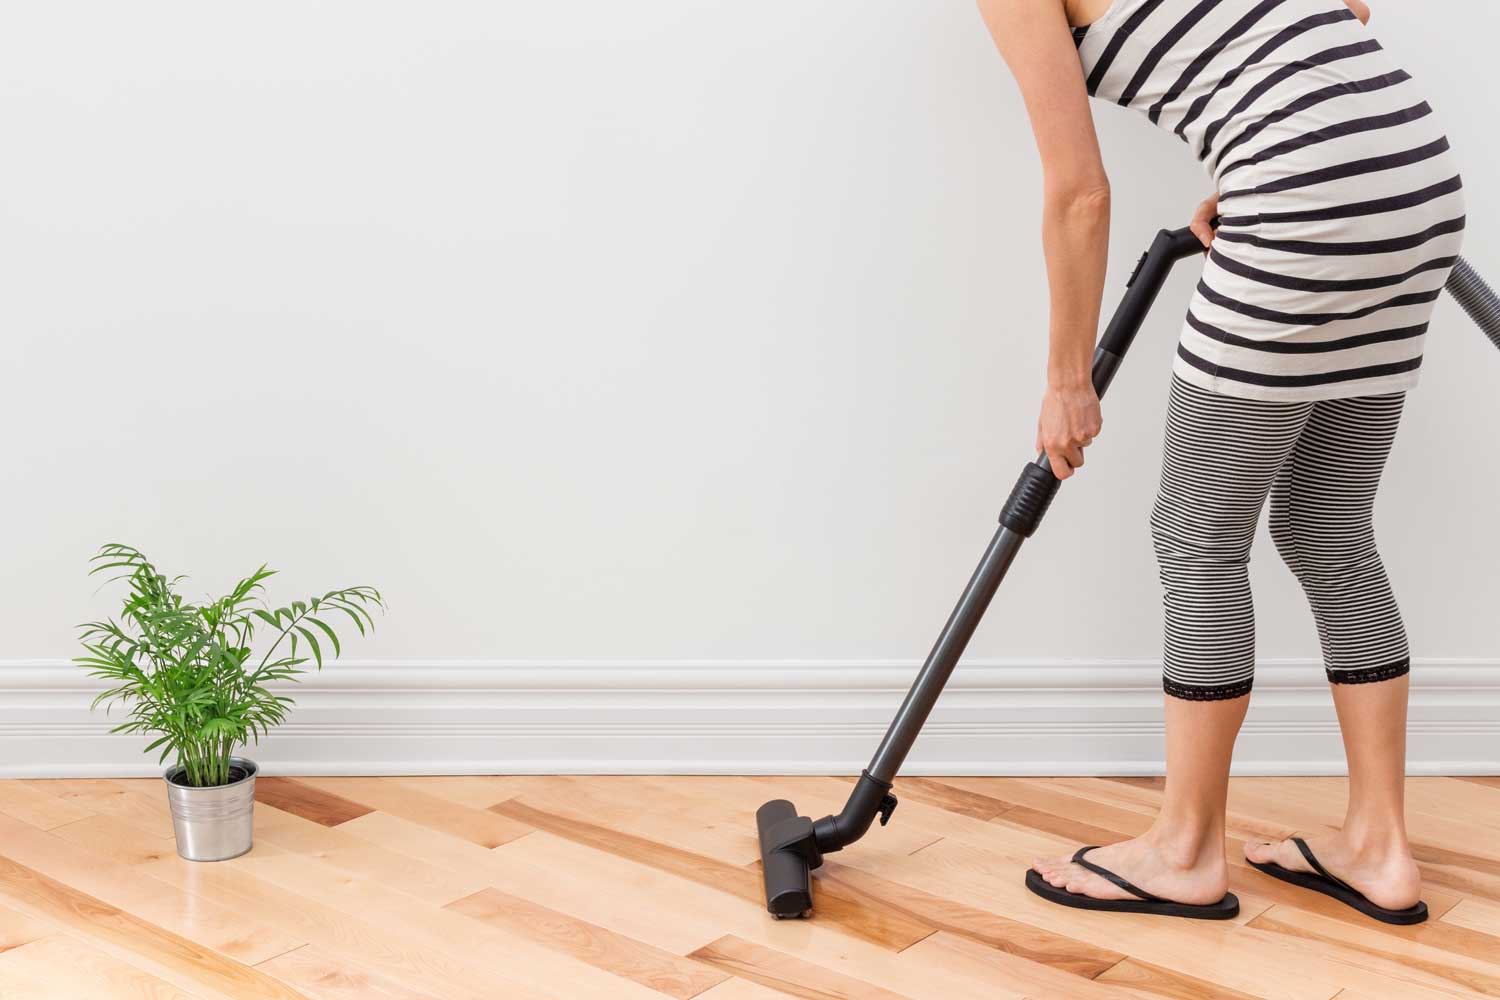 Regulary vacuum or sweep floors to remove dirt and keep your home floors looking amazing - tips from Footprints Floors in Worcester County.